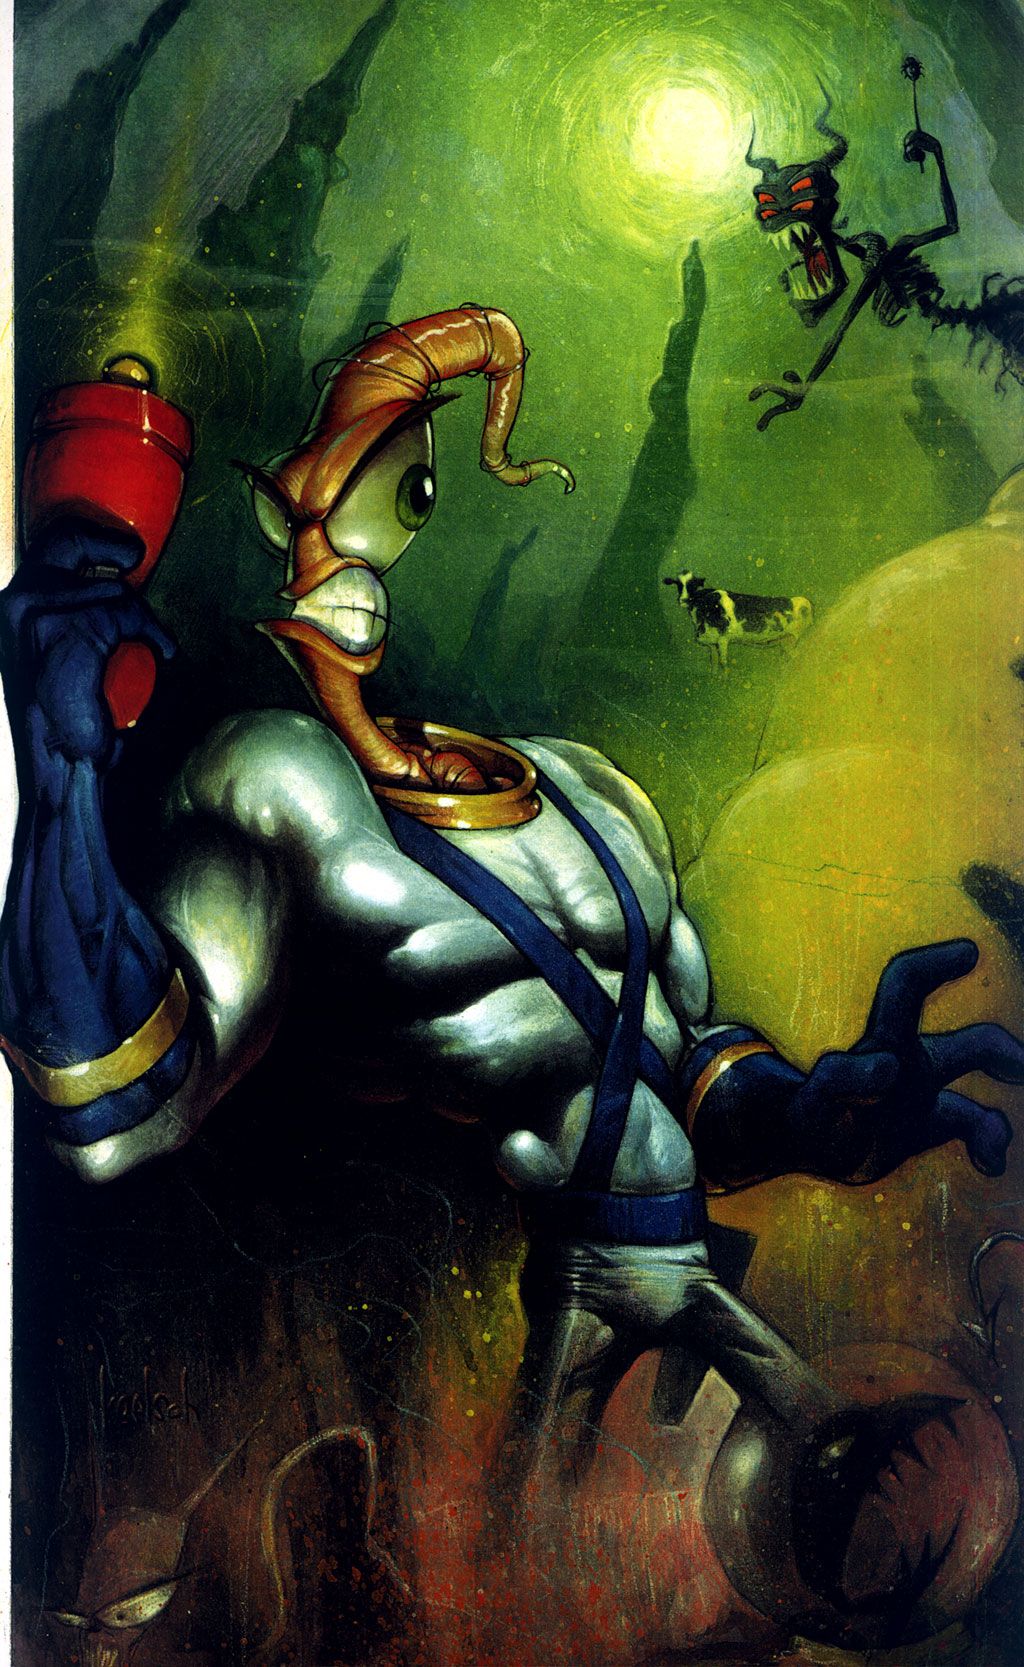 download earth worm jim 4